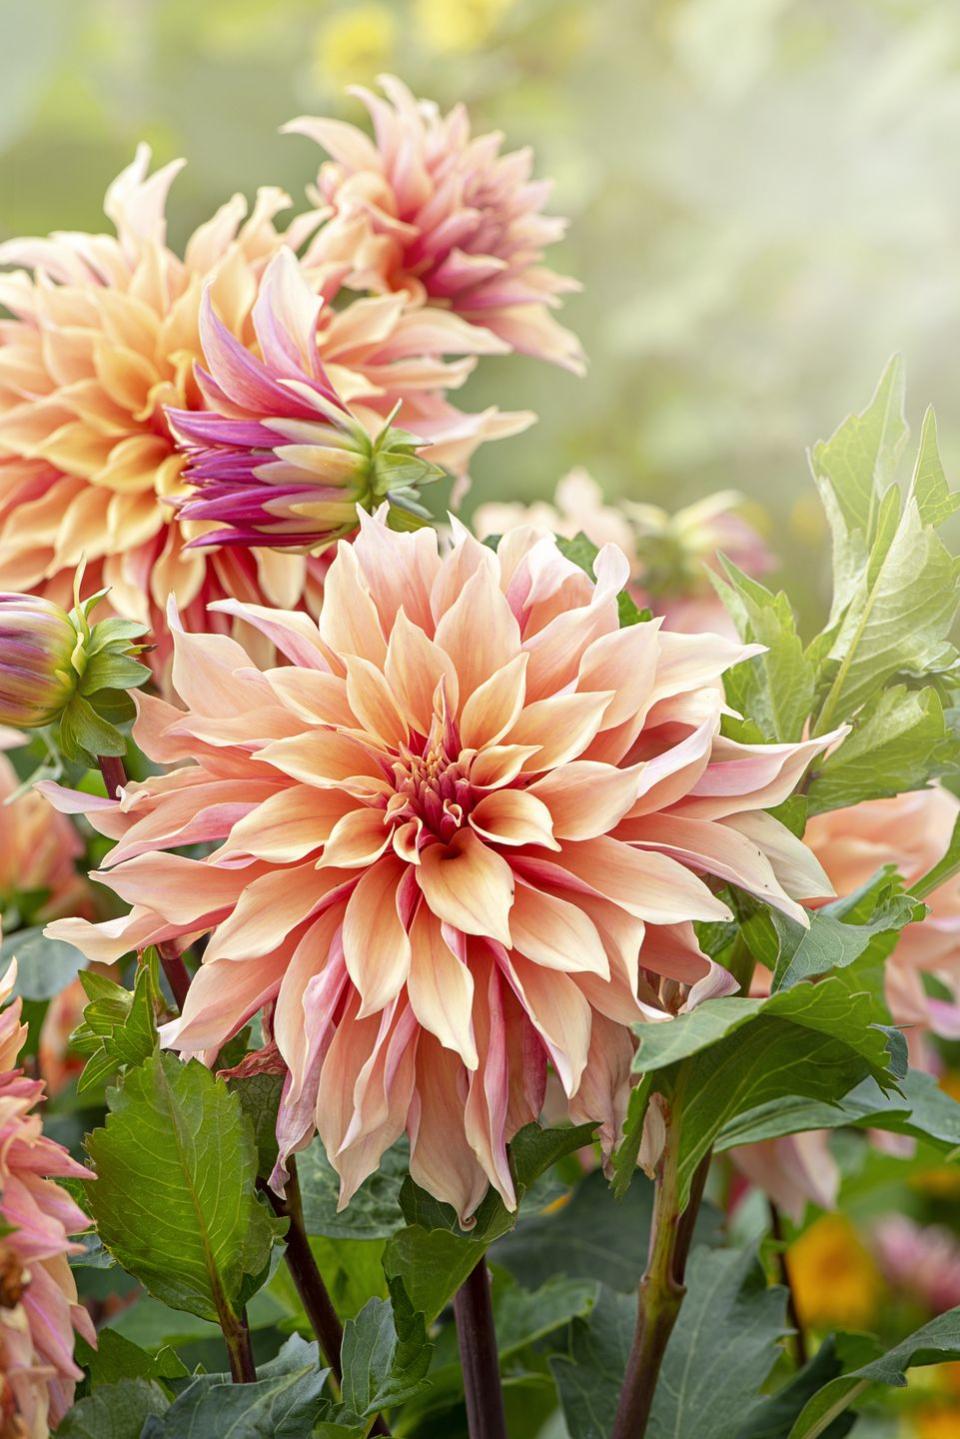 close up image of the beautiful peach coloured decorative dahlia flower also known as a dinner plate dahlia